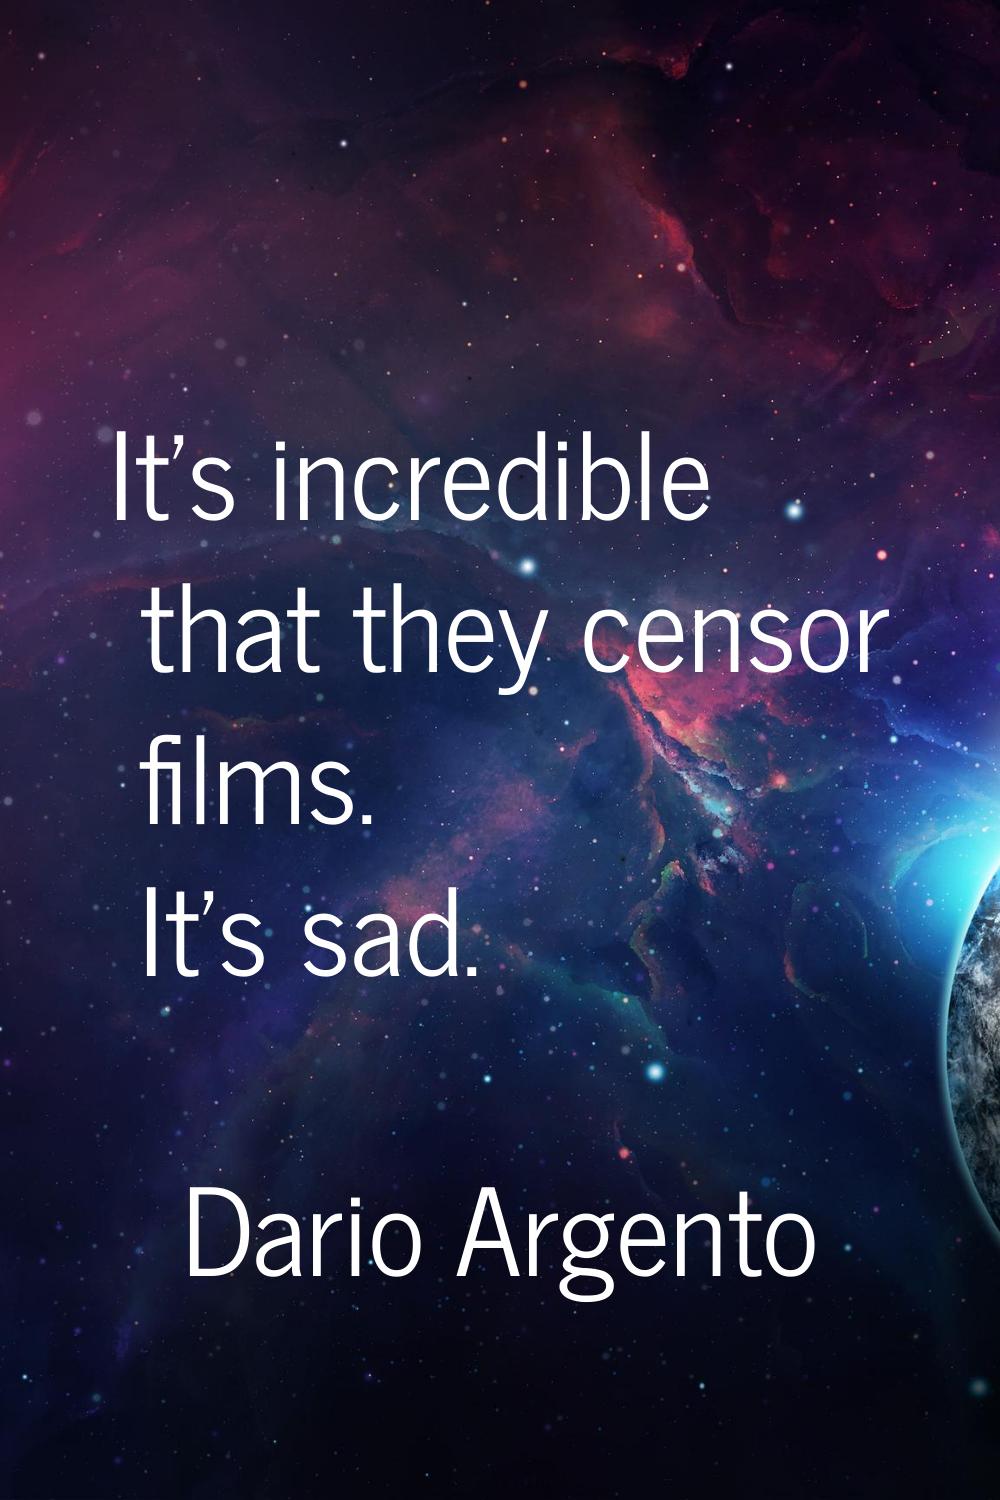 It's incredible that they censor films. It's sad.